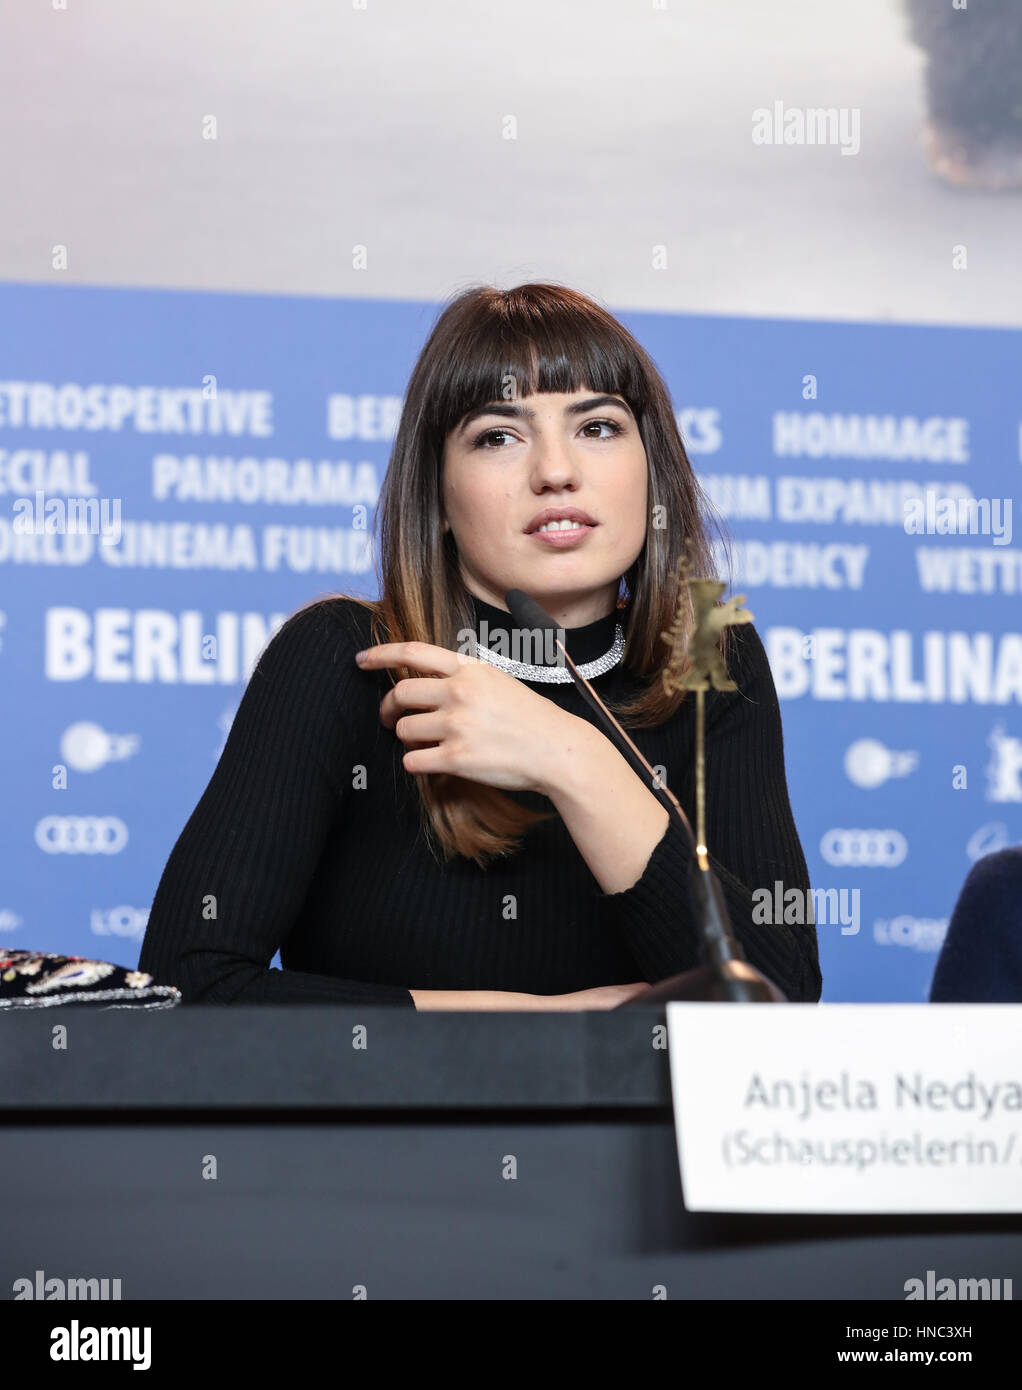 Berlin, Germany. 10th Feb, 2017. Actress Anjela Nedyalkova of British film 'T2 Trainspotting' attends a press conference during the 67th Berlinale International Film Festival in Berlin, capital of Germany, on Feb. 10, 2017. Credit: Shan Yuqi/Xinhua/Alamy Live News Stock Photo